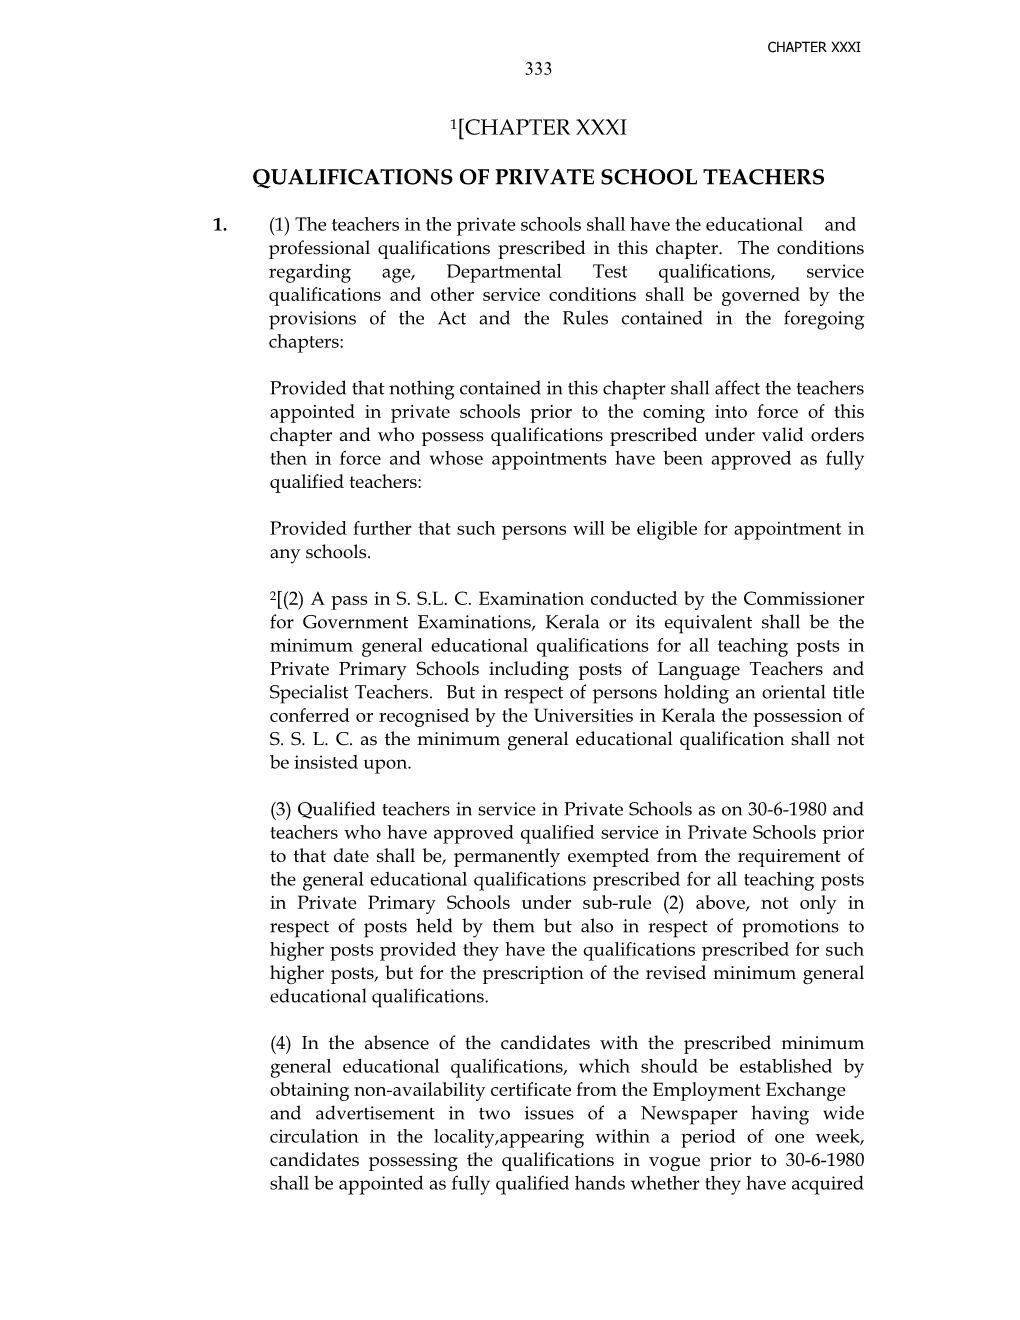 1[Chapter Xxxi Qualifications of Private School Teachers